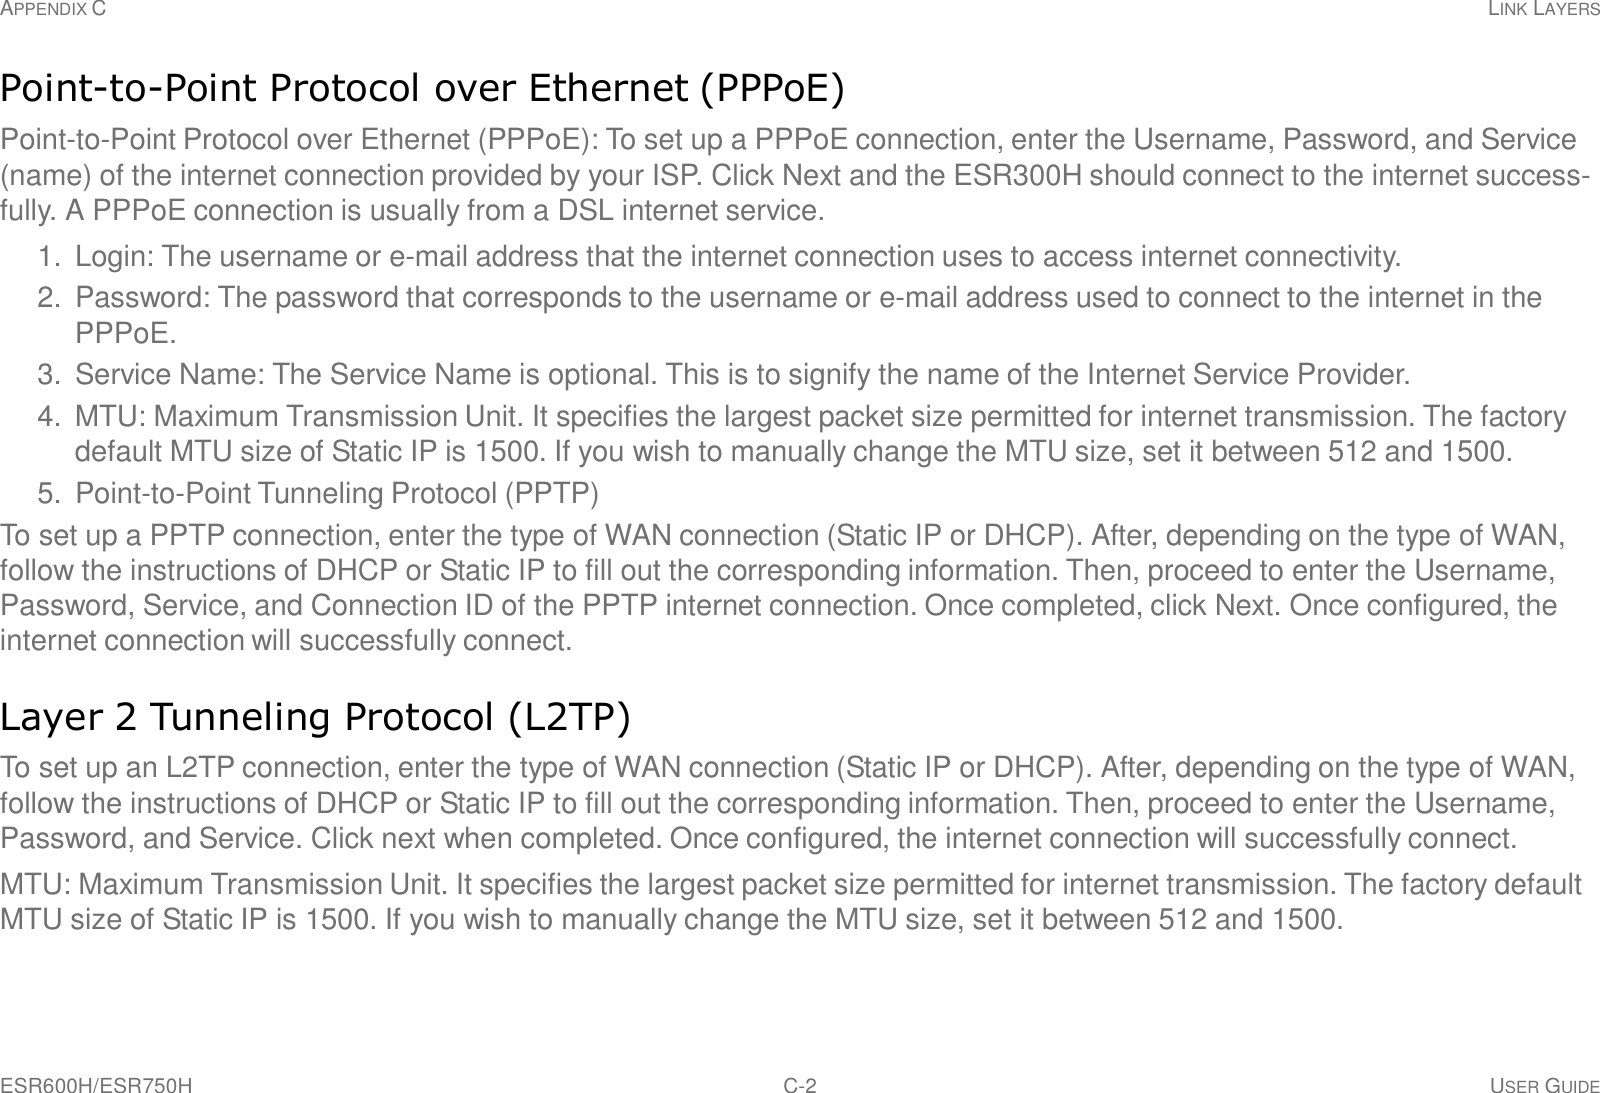 APPENDIX C LINK LAYERS ESR600H/ESR750H C-2 USER GUIDE     Point-to-Point Protocol over Ethernet (PPPoE)  Point-to-Point Protocol over Ethernet (PPPoE): To set up a PPPoE connection, enter the Username, Password, and Service (name) of the internet connection provided by your ISP. Click Next and the ESR300H should connect to the internet success- fully. A PPPoE connection is usually from a DSL internet service.  1.  Login: The username or e-mail address that the internet connection uses to access internet connectivity. 2.  Password: The password that corresponds to the username or e-mail address used to connect to the internet in the PPPoE. 3.  Service Name: The Service Name is optional. This is to signify the name of the Internet Service Provider. 4. MTU: Maximum Transmission Unit. It specifies the largest packet size permitted for internet transmission. The factory default MTU size of Static IP is 1500. If you wish to manually change the MTU size, set it between 512 and 1500. 5. Point-to-Point Tunneling Protocol (PPTP) To set up a PPTP connection, enter the type of WAN connection (Static IP or DHCP). After, depending on the type of WAN, follow the instructions of DHCP or Static IP to fill out the corresponding information. Then, proceed to enter the Username, Password, Service, and Connection ID of the PPTP internet connection. Once completed, click Next. Once configured, the internet connection will successfully connect.   Layer 2 Tunneling Protocol (L2TP)  To set up an L2TP connection, enter the type of WAN connection (Static IP or DHCP). After, depending on the type of WAN, follow the instructions of DHCP or Static IP to fill out the corresponding information. Then, proceed to enter the Username, Password, and Service. Click next when completed. Once configured, the internet connection will successfully connect. MTU: Maximum Transmission Unit. It specifies the largest packet size permitted for internet transmission. The factory default MTU size of Static IP is 1500. If you wish to manually change the MTU size, set it between 512 and 1500. 